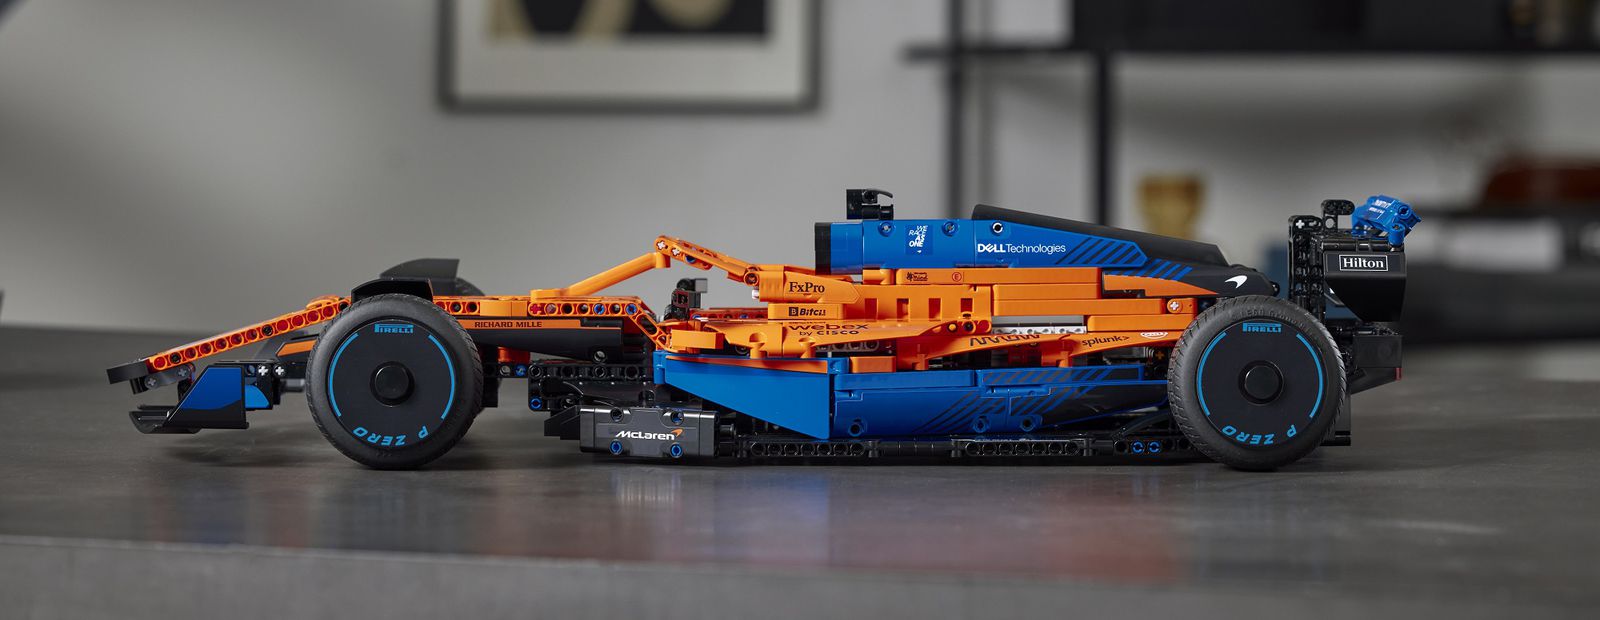 This new Lego Technic set is our first look at the 2022 McLaren F1